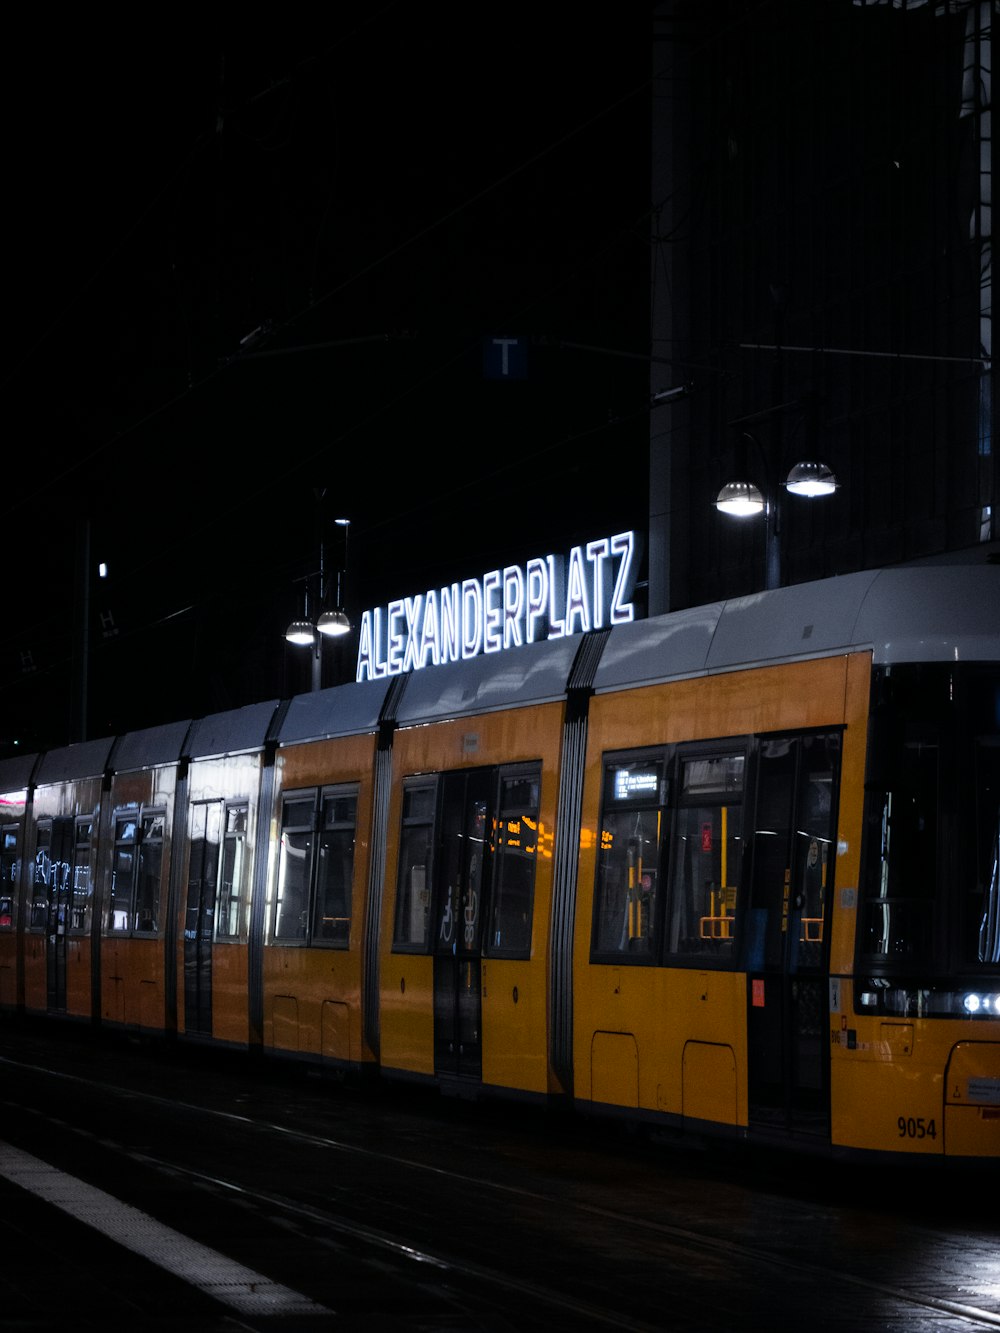 yellow and white tram during night time